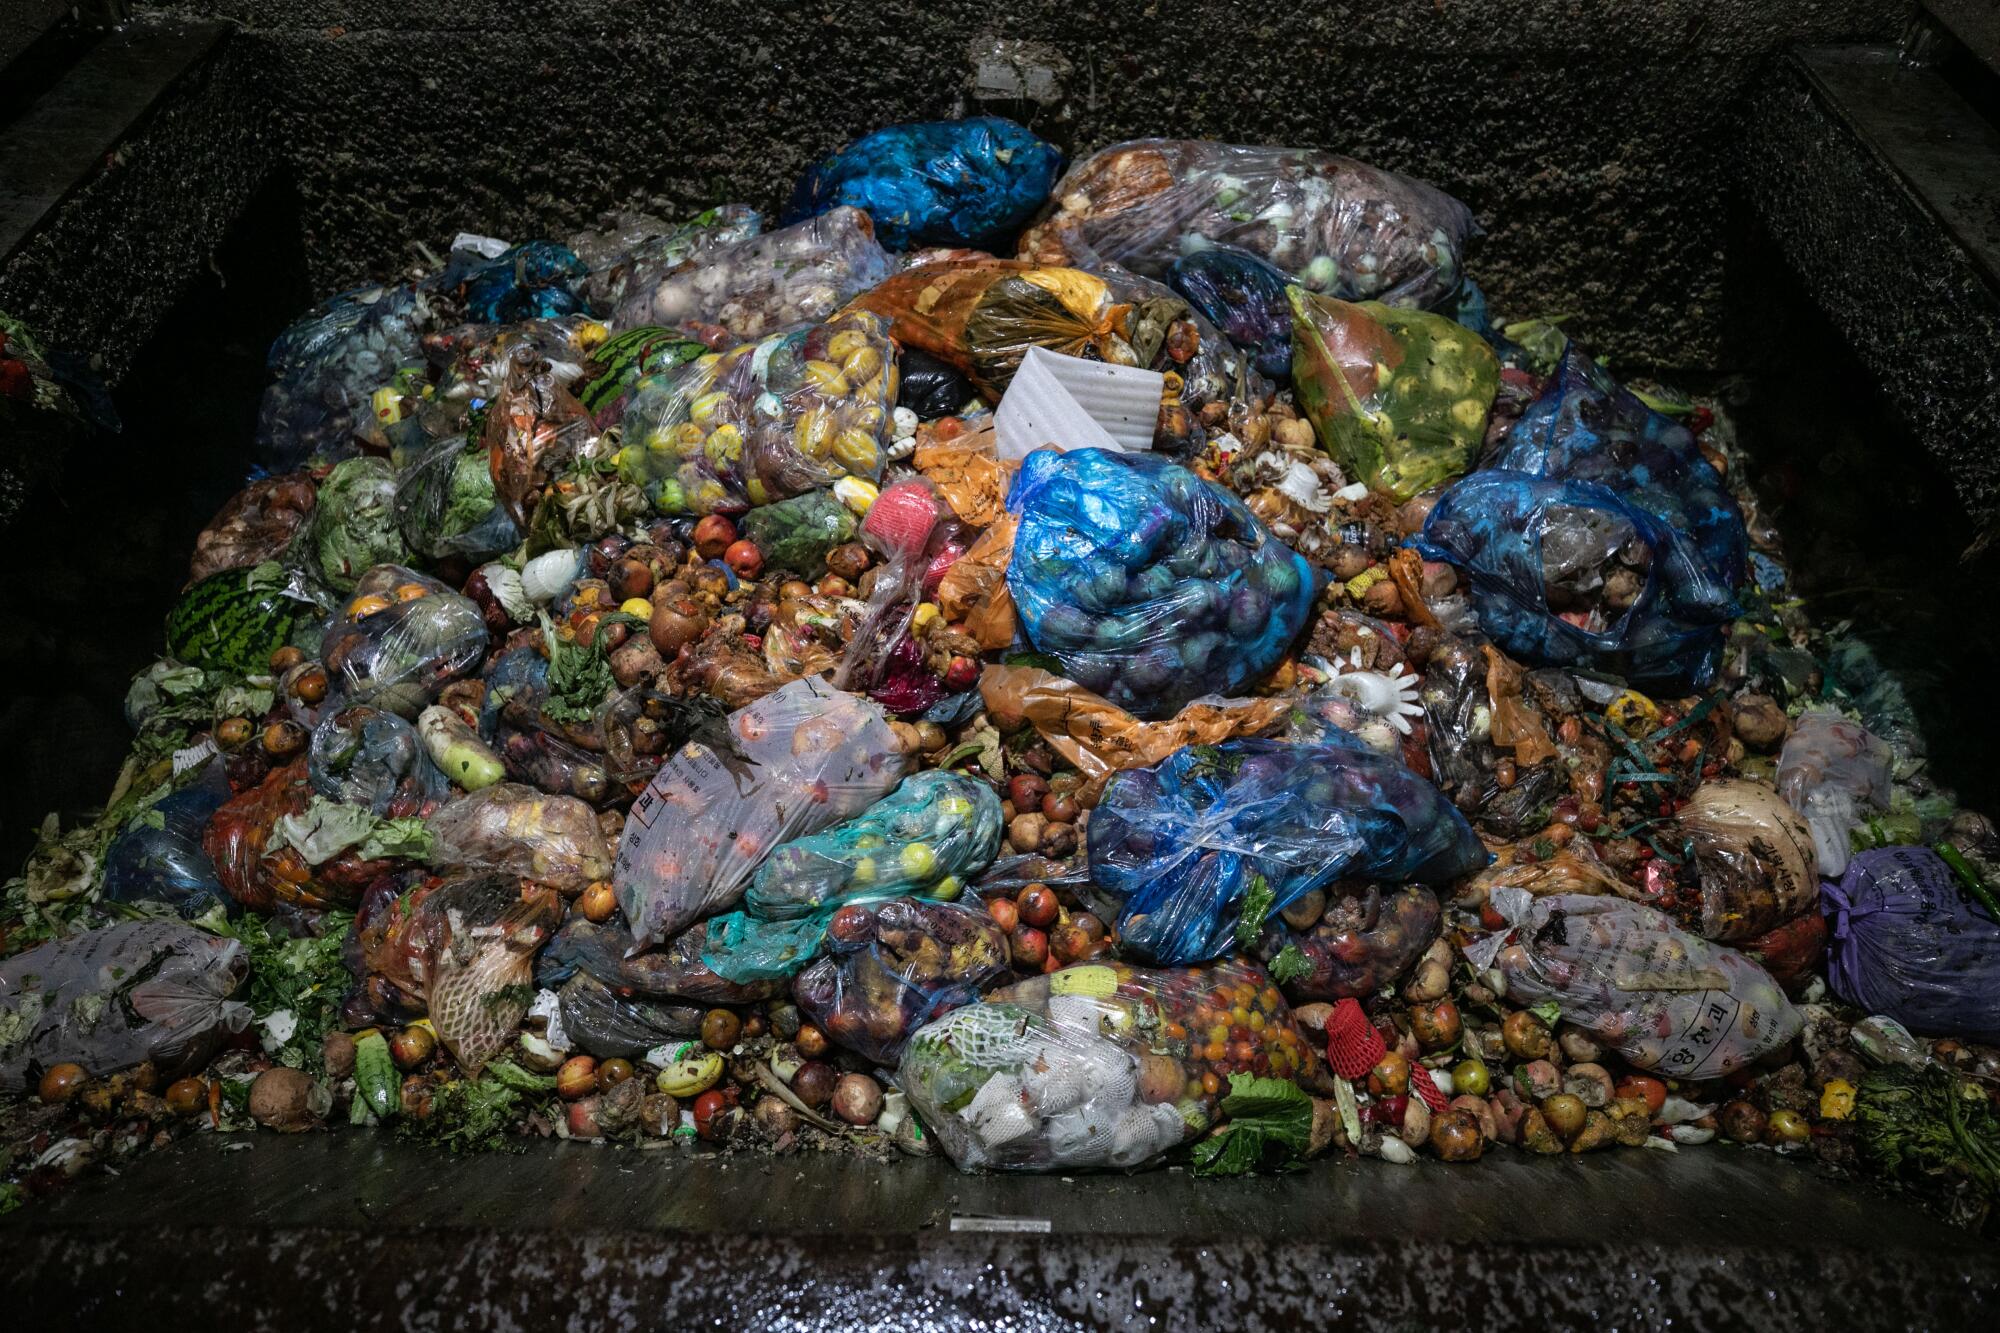 A large pile of bags of food waste seen inside a large dark hopper